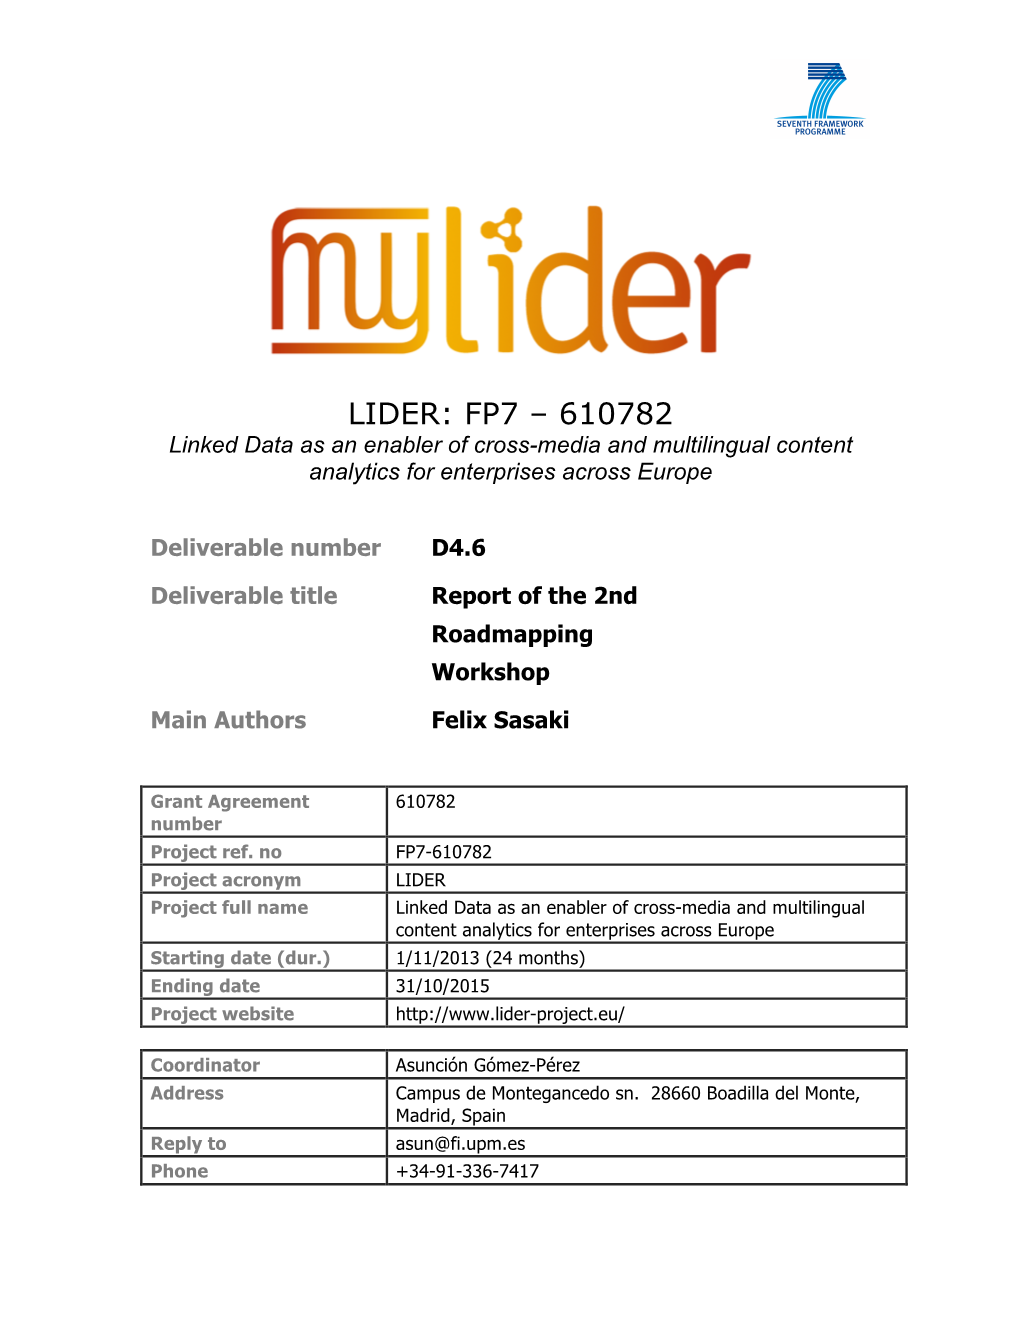 LIDER: FP7 – 610782 Linked Data As an Enabler of Cross-Media and Multilingual Content Analytics for Enterprises Across Europe